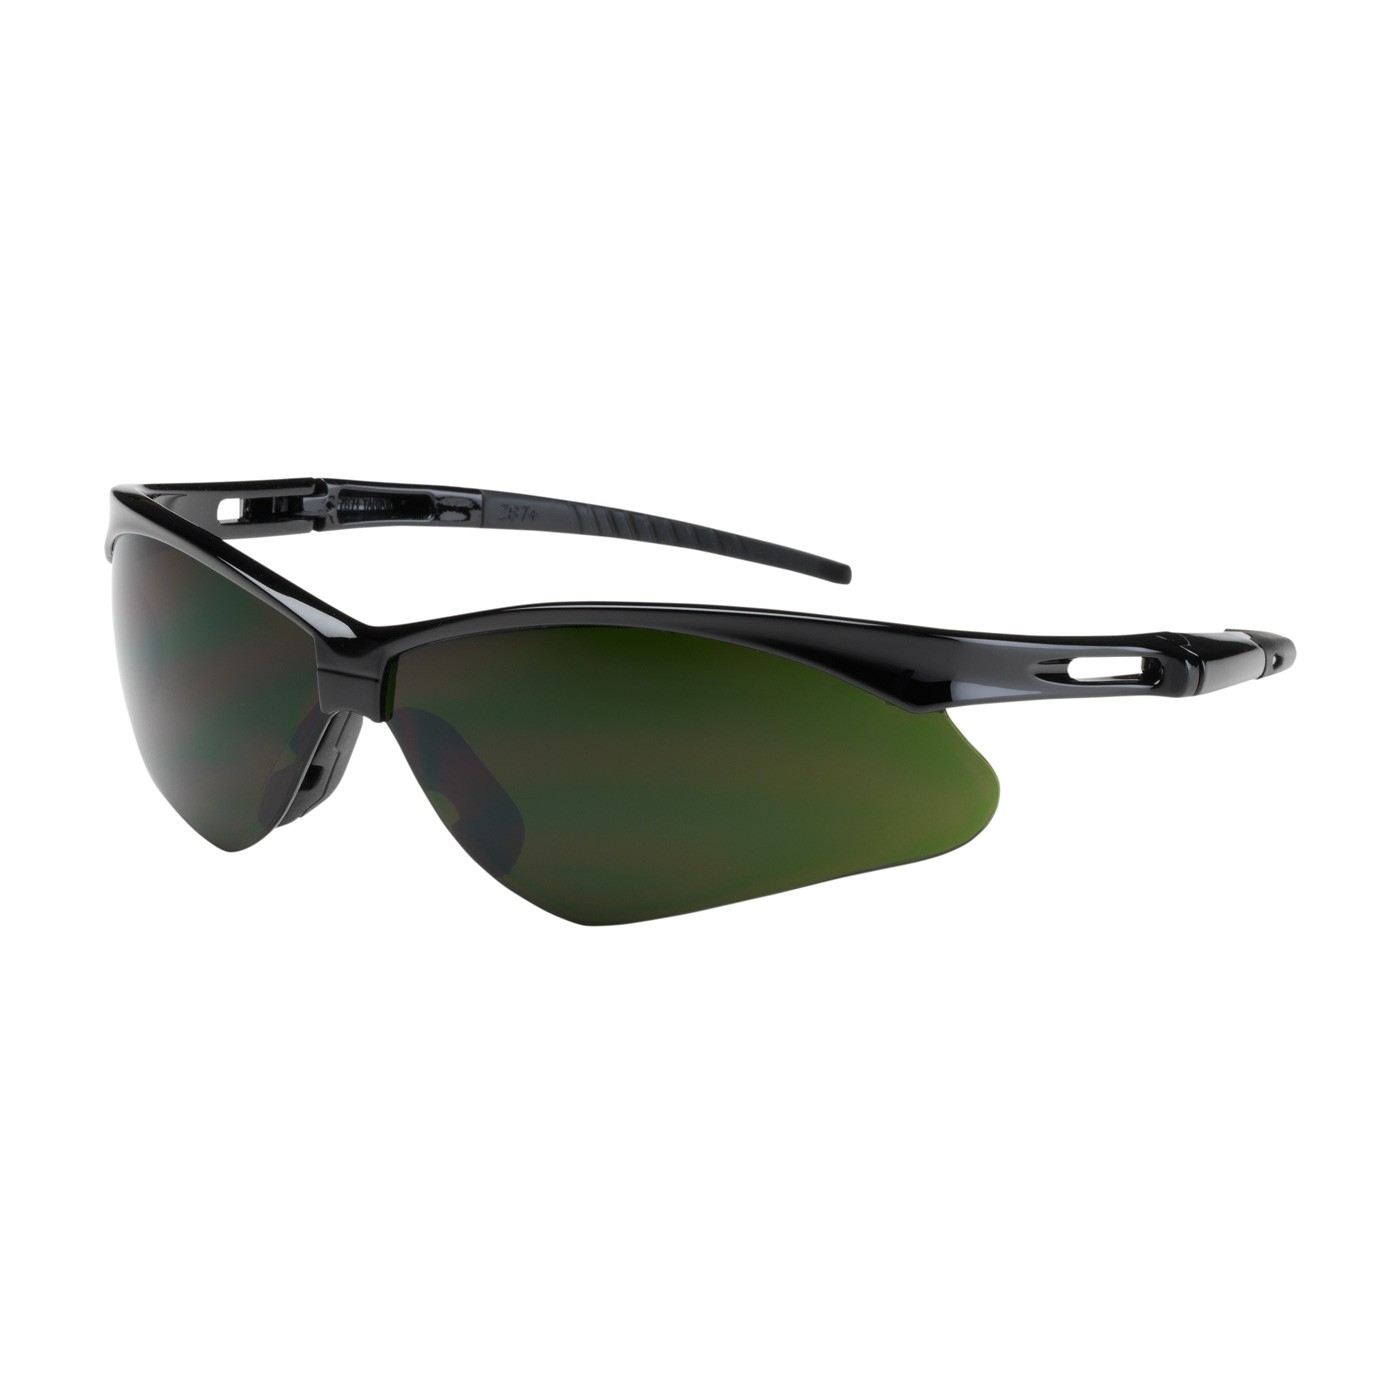 Anser™ Semi-Rimless Safety Glasses with Black Frame, IR Filter Shade 5.0 Lens and Anti-Scratch Coating  (#250-AN-10119)